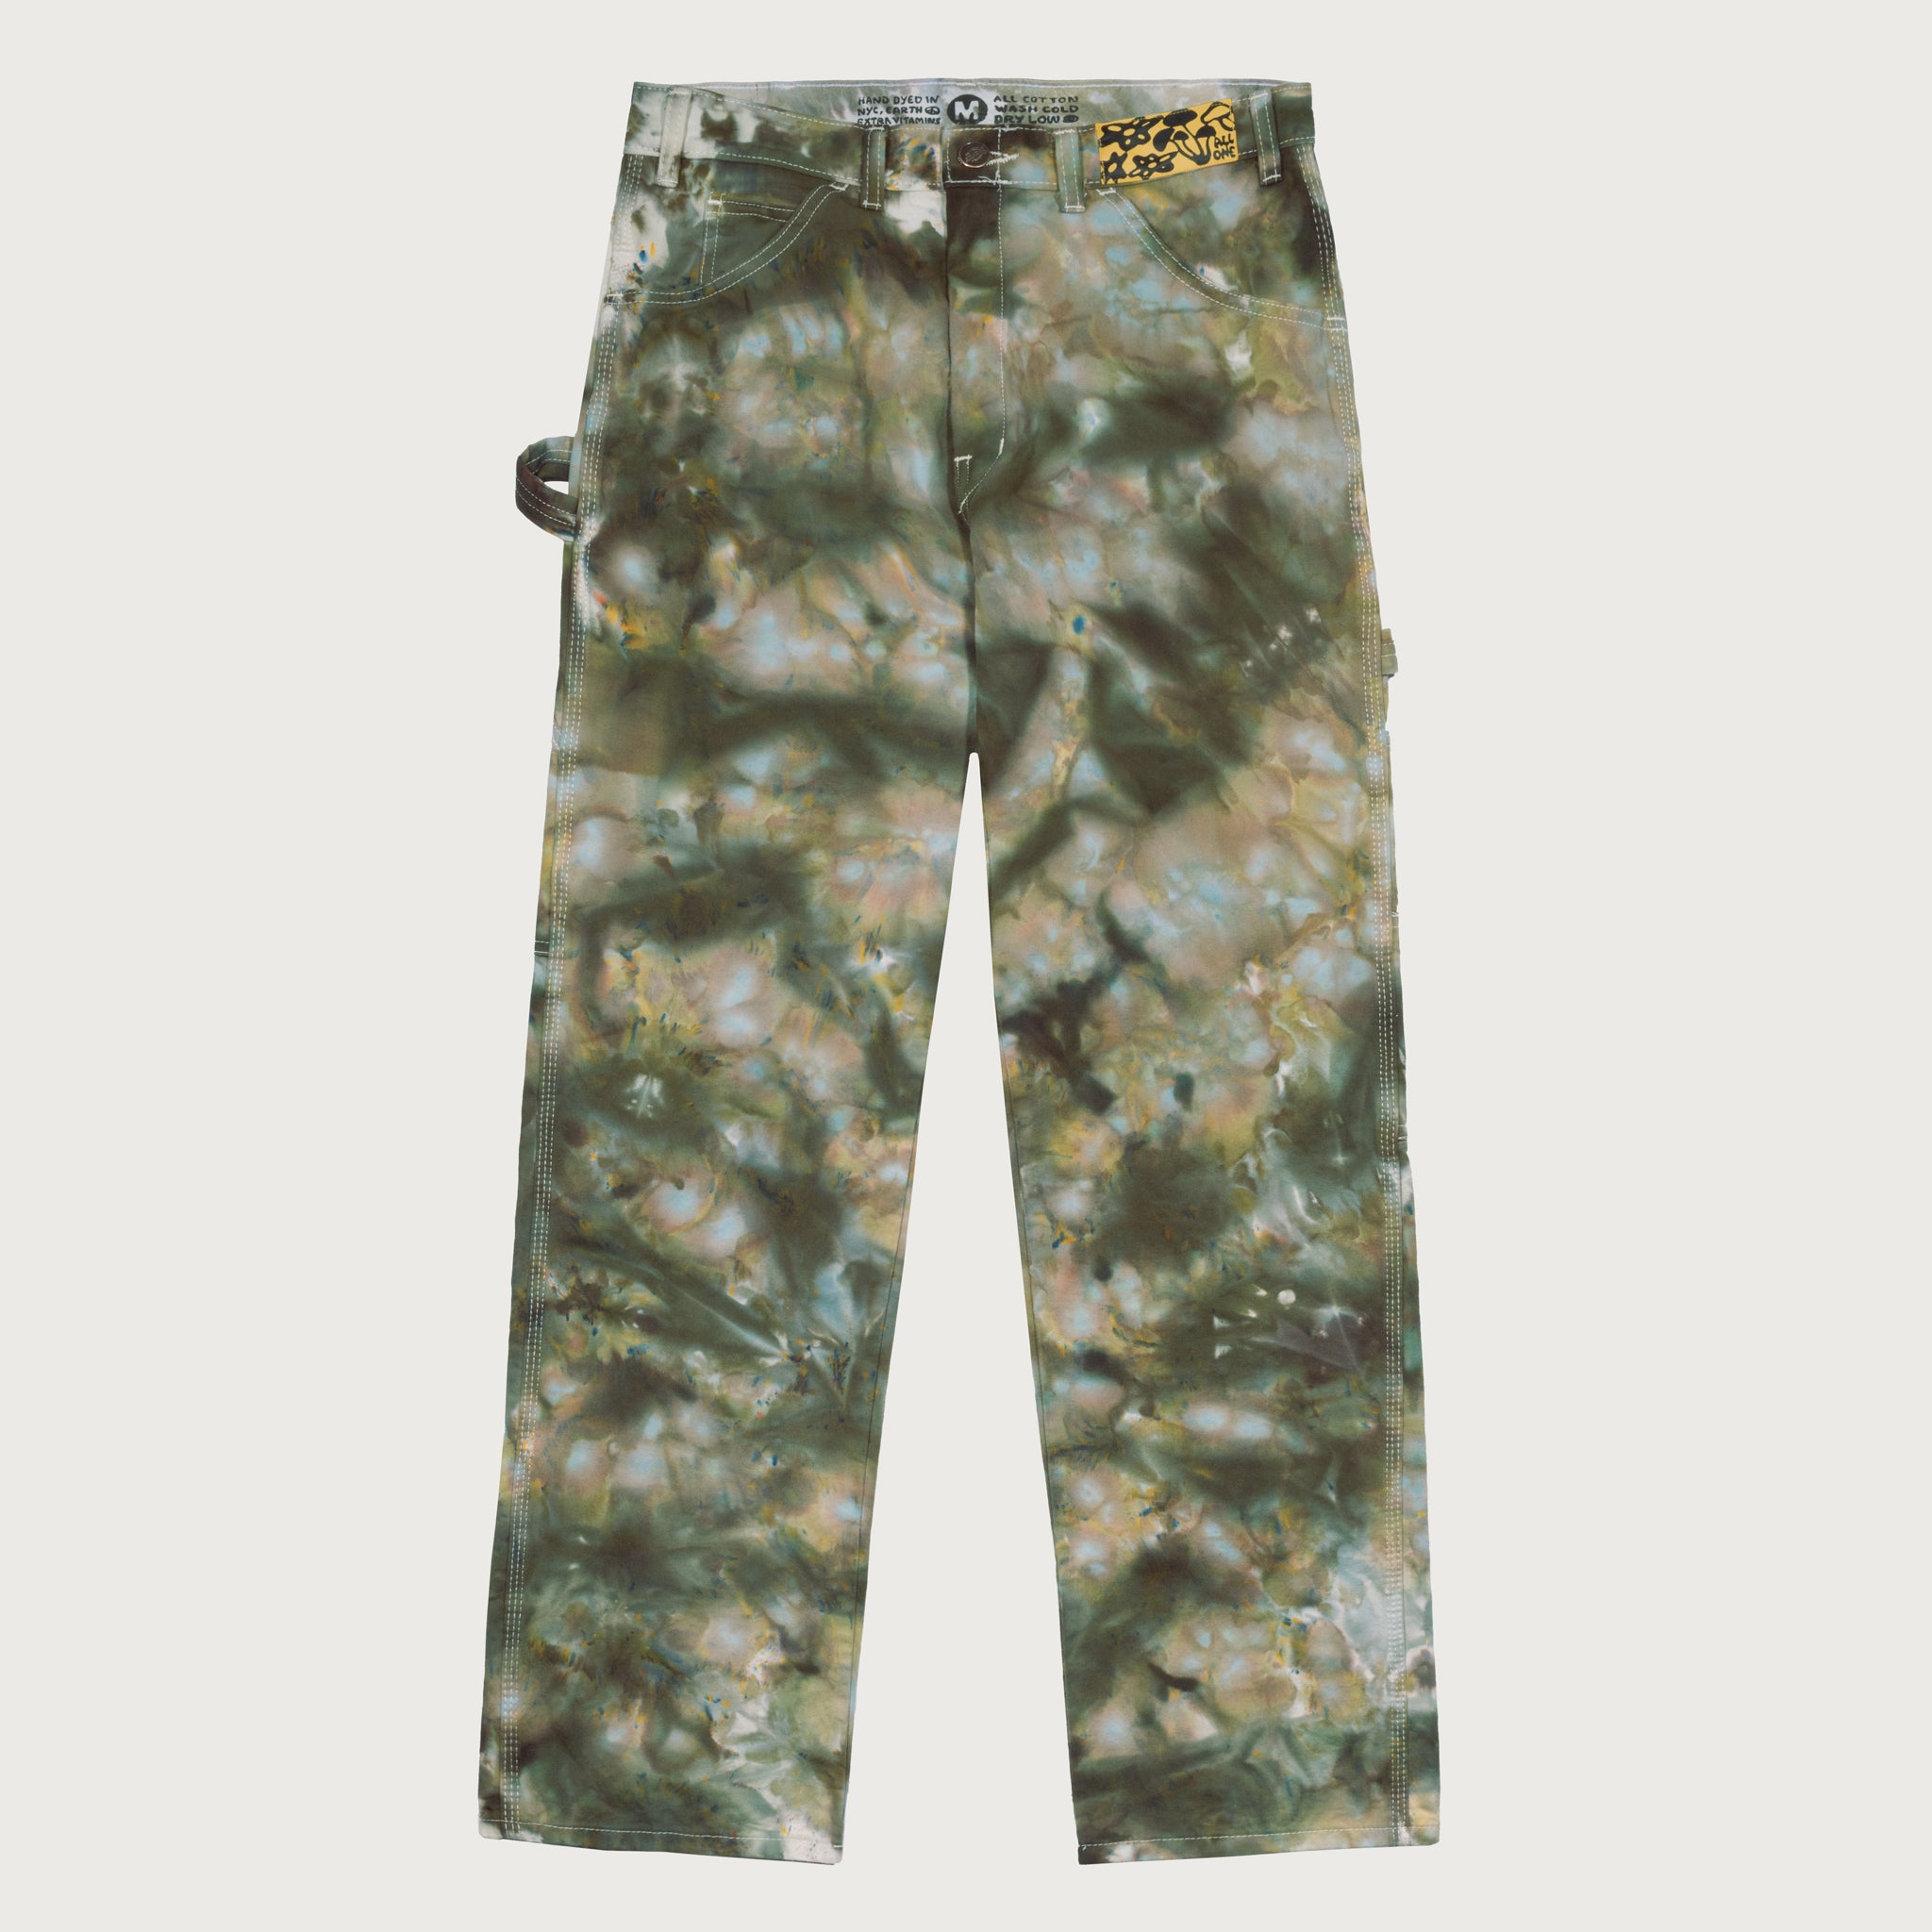 FOREST pants